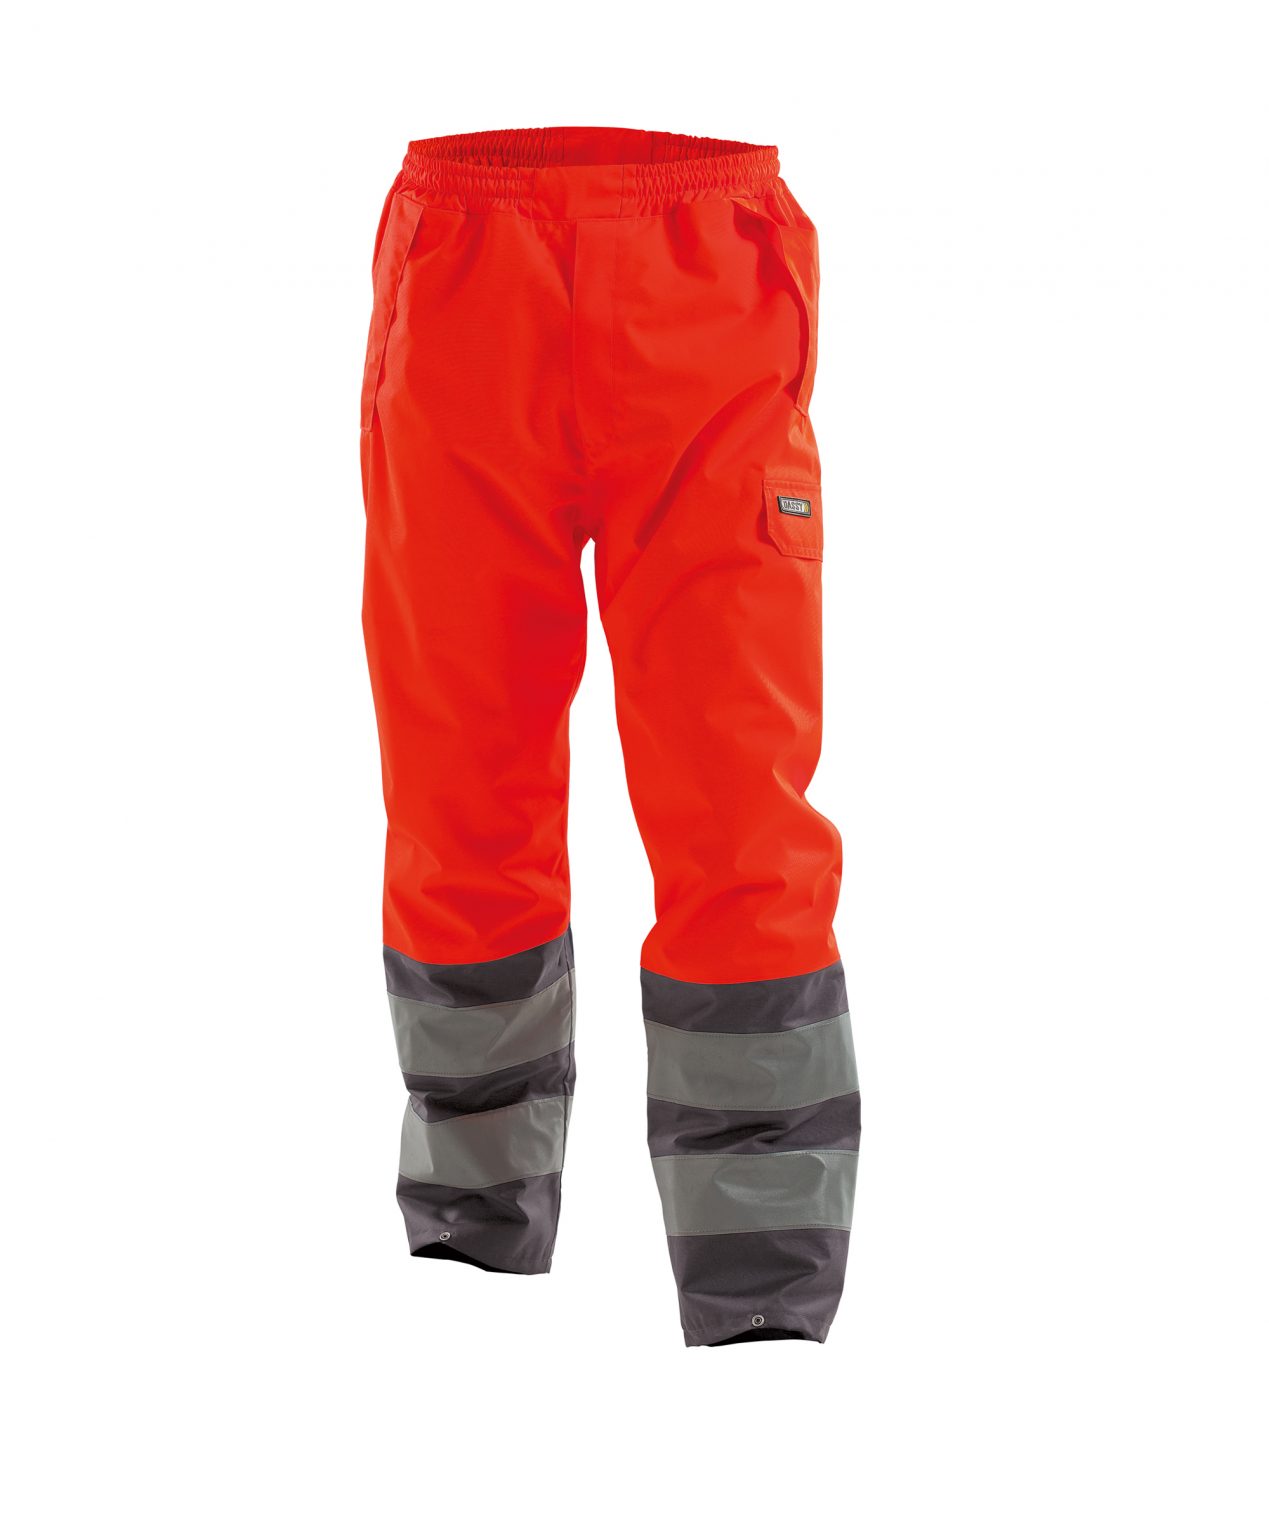 sola high visibility waterproof work trousers fluo red cement grey front